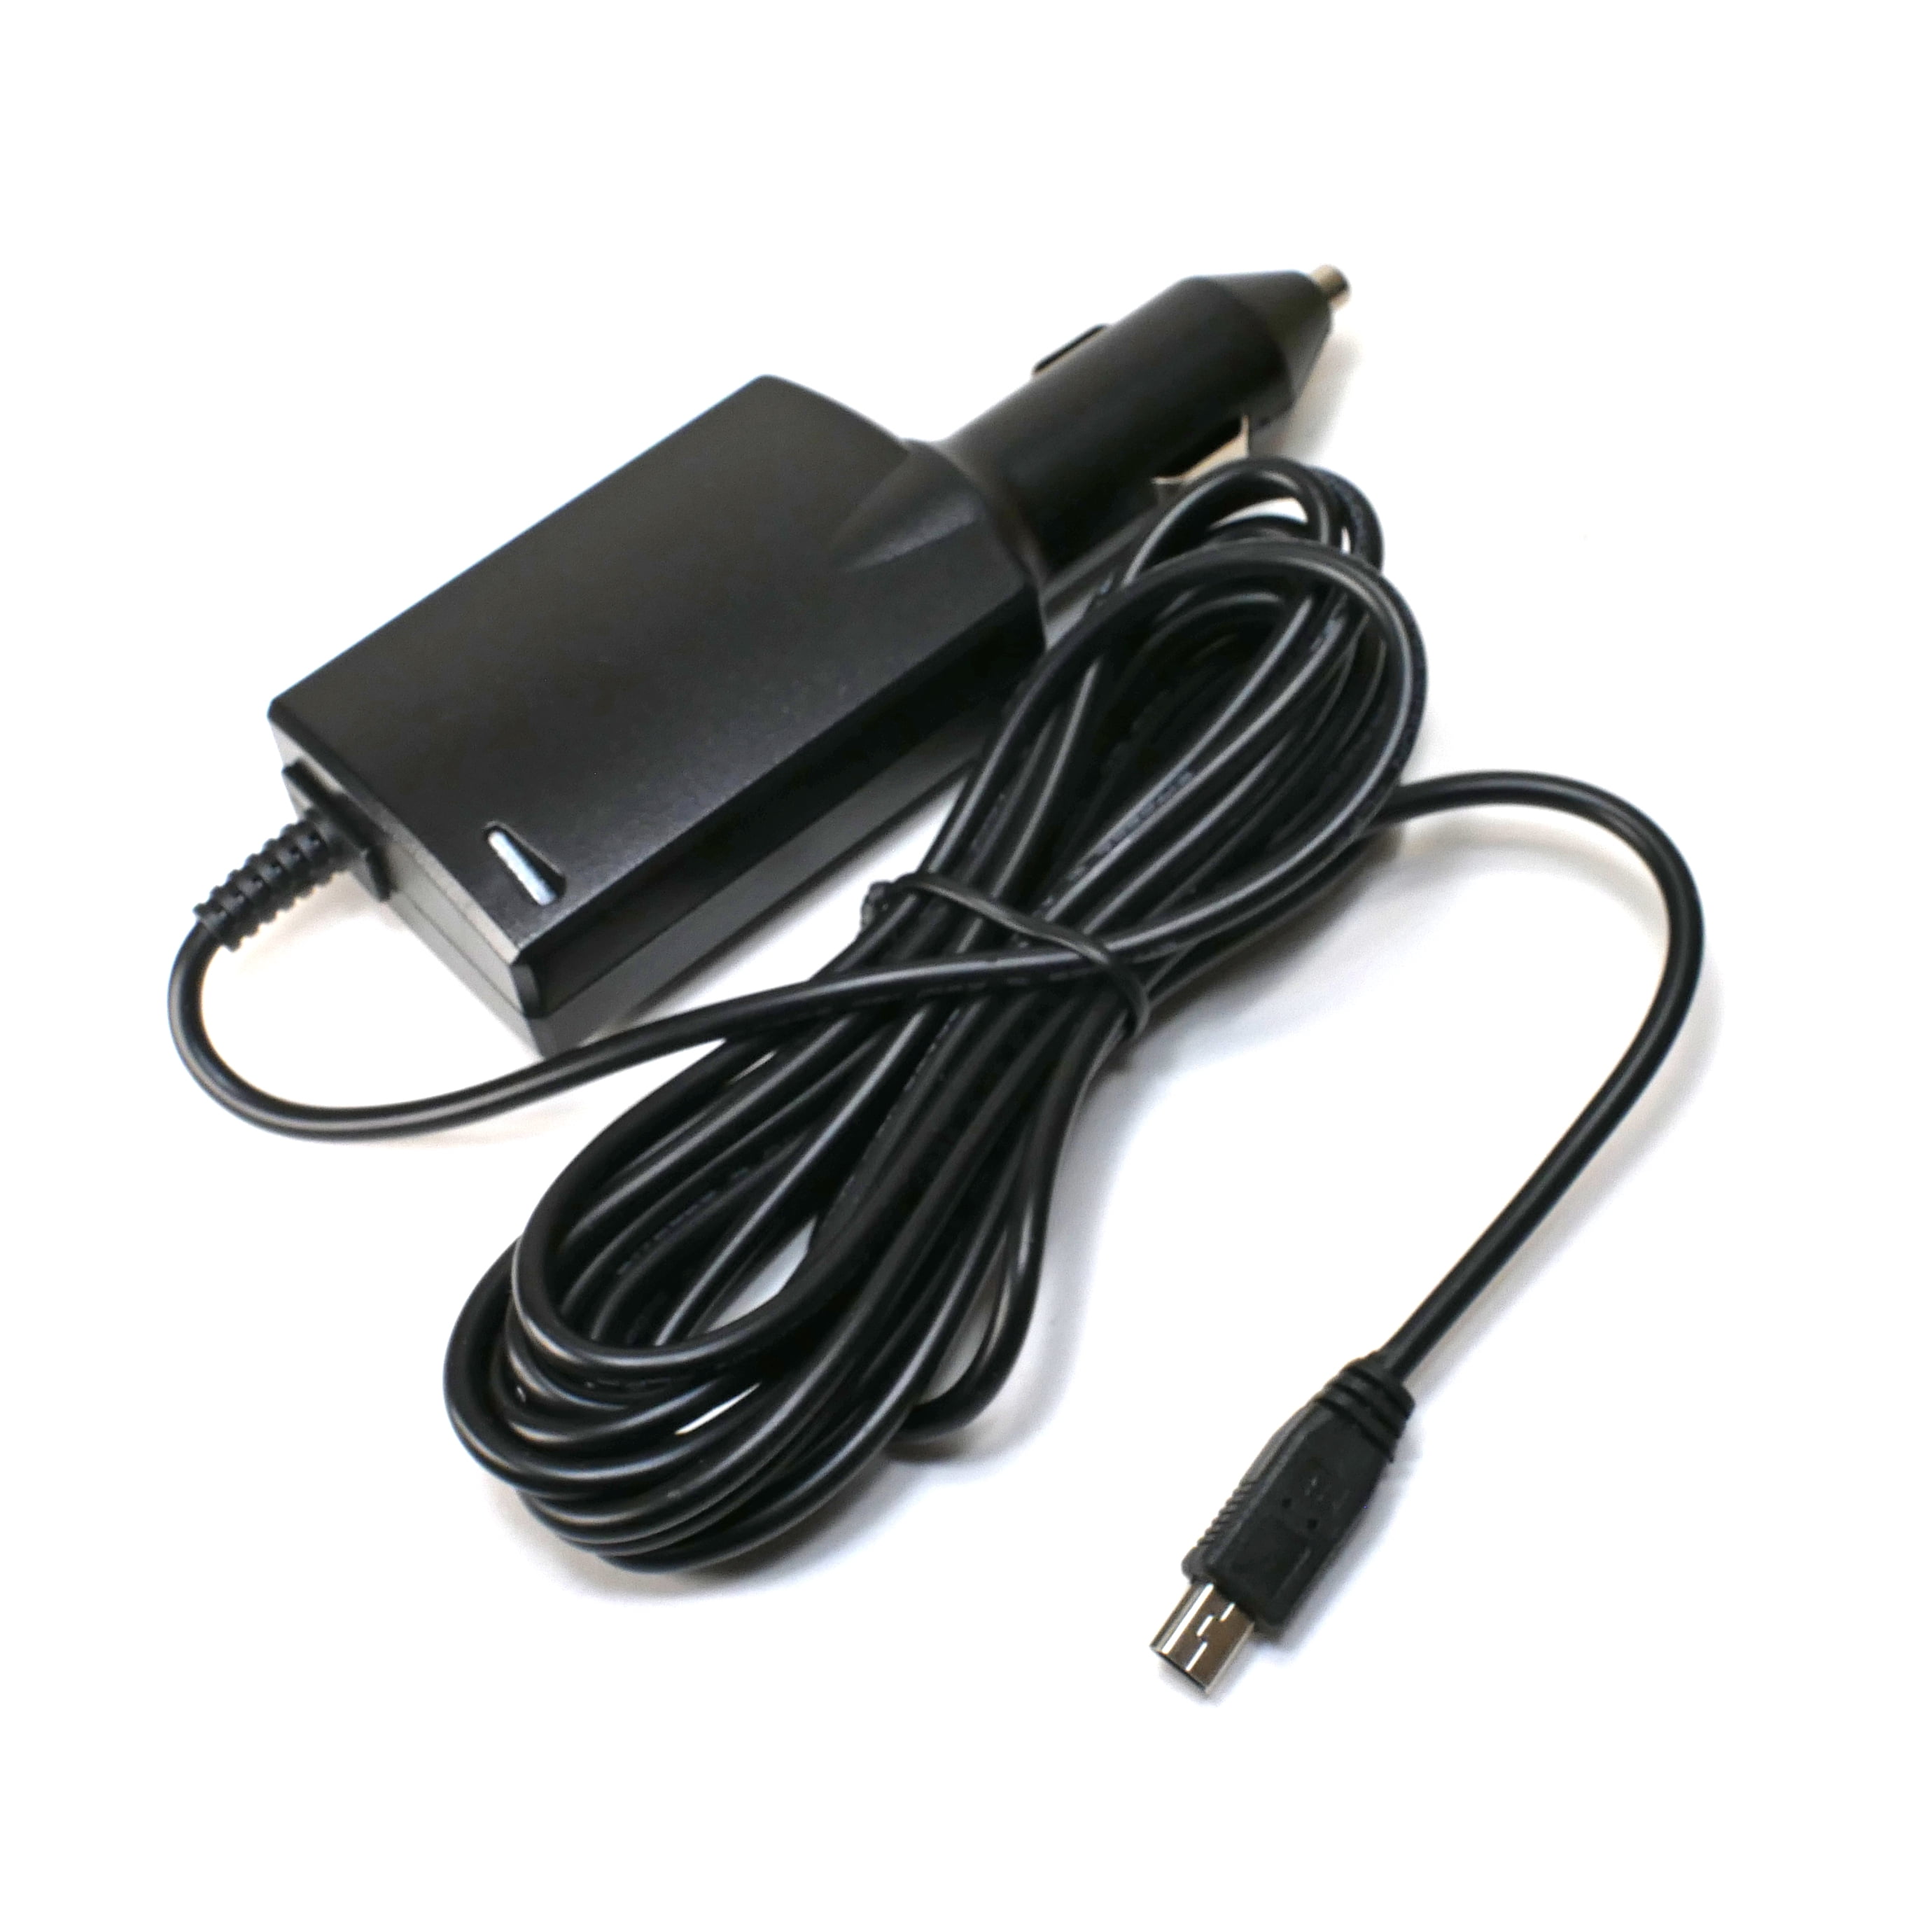 CAR Charger Power Adapter CABLE for RAND MCNALLY TND510 GPS 